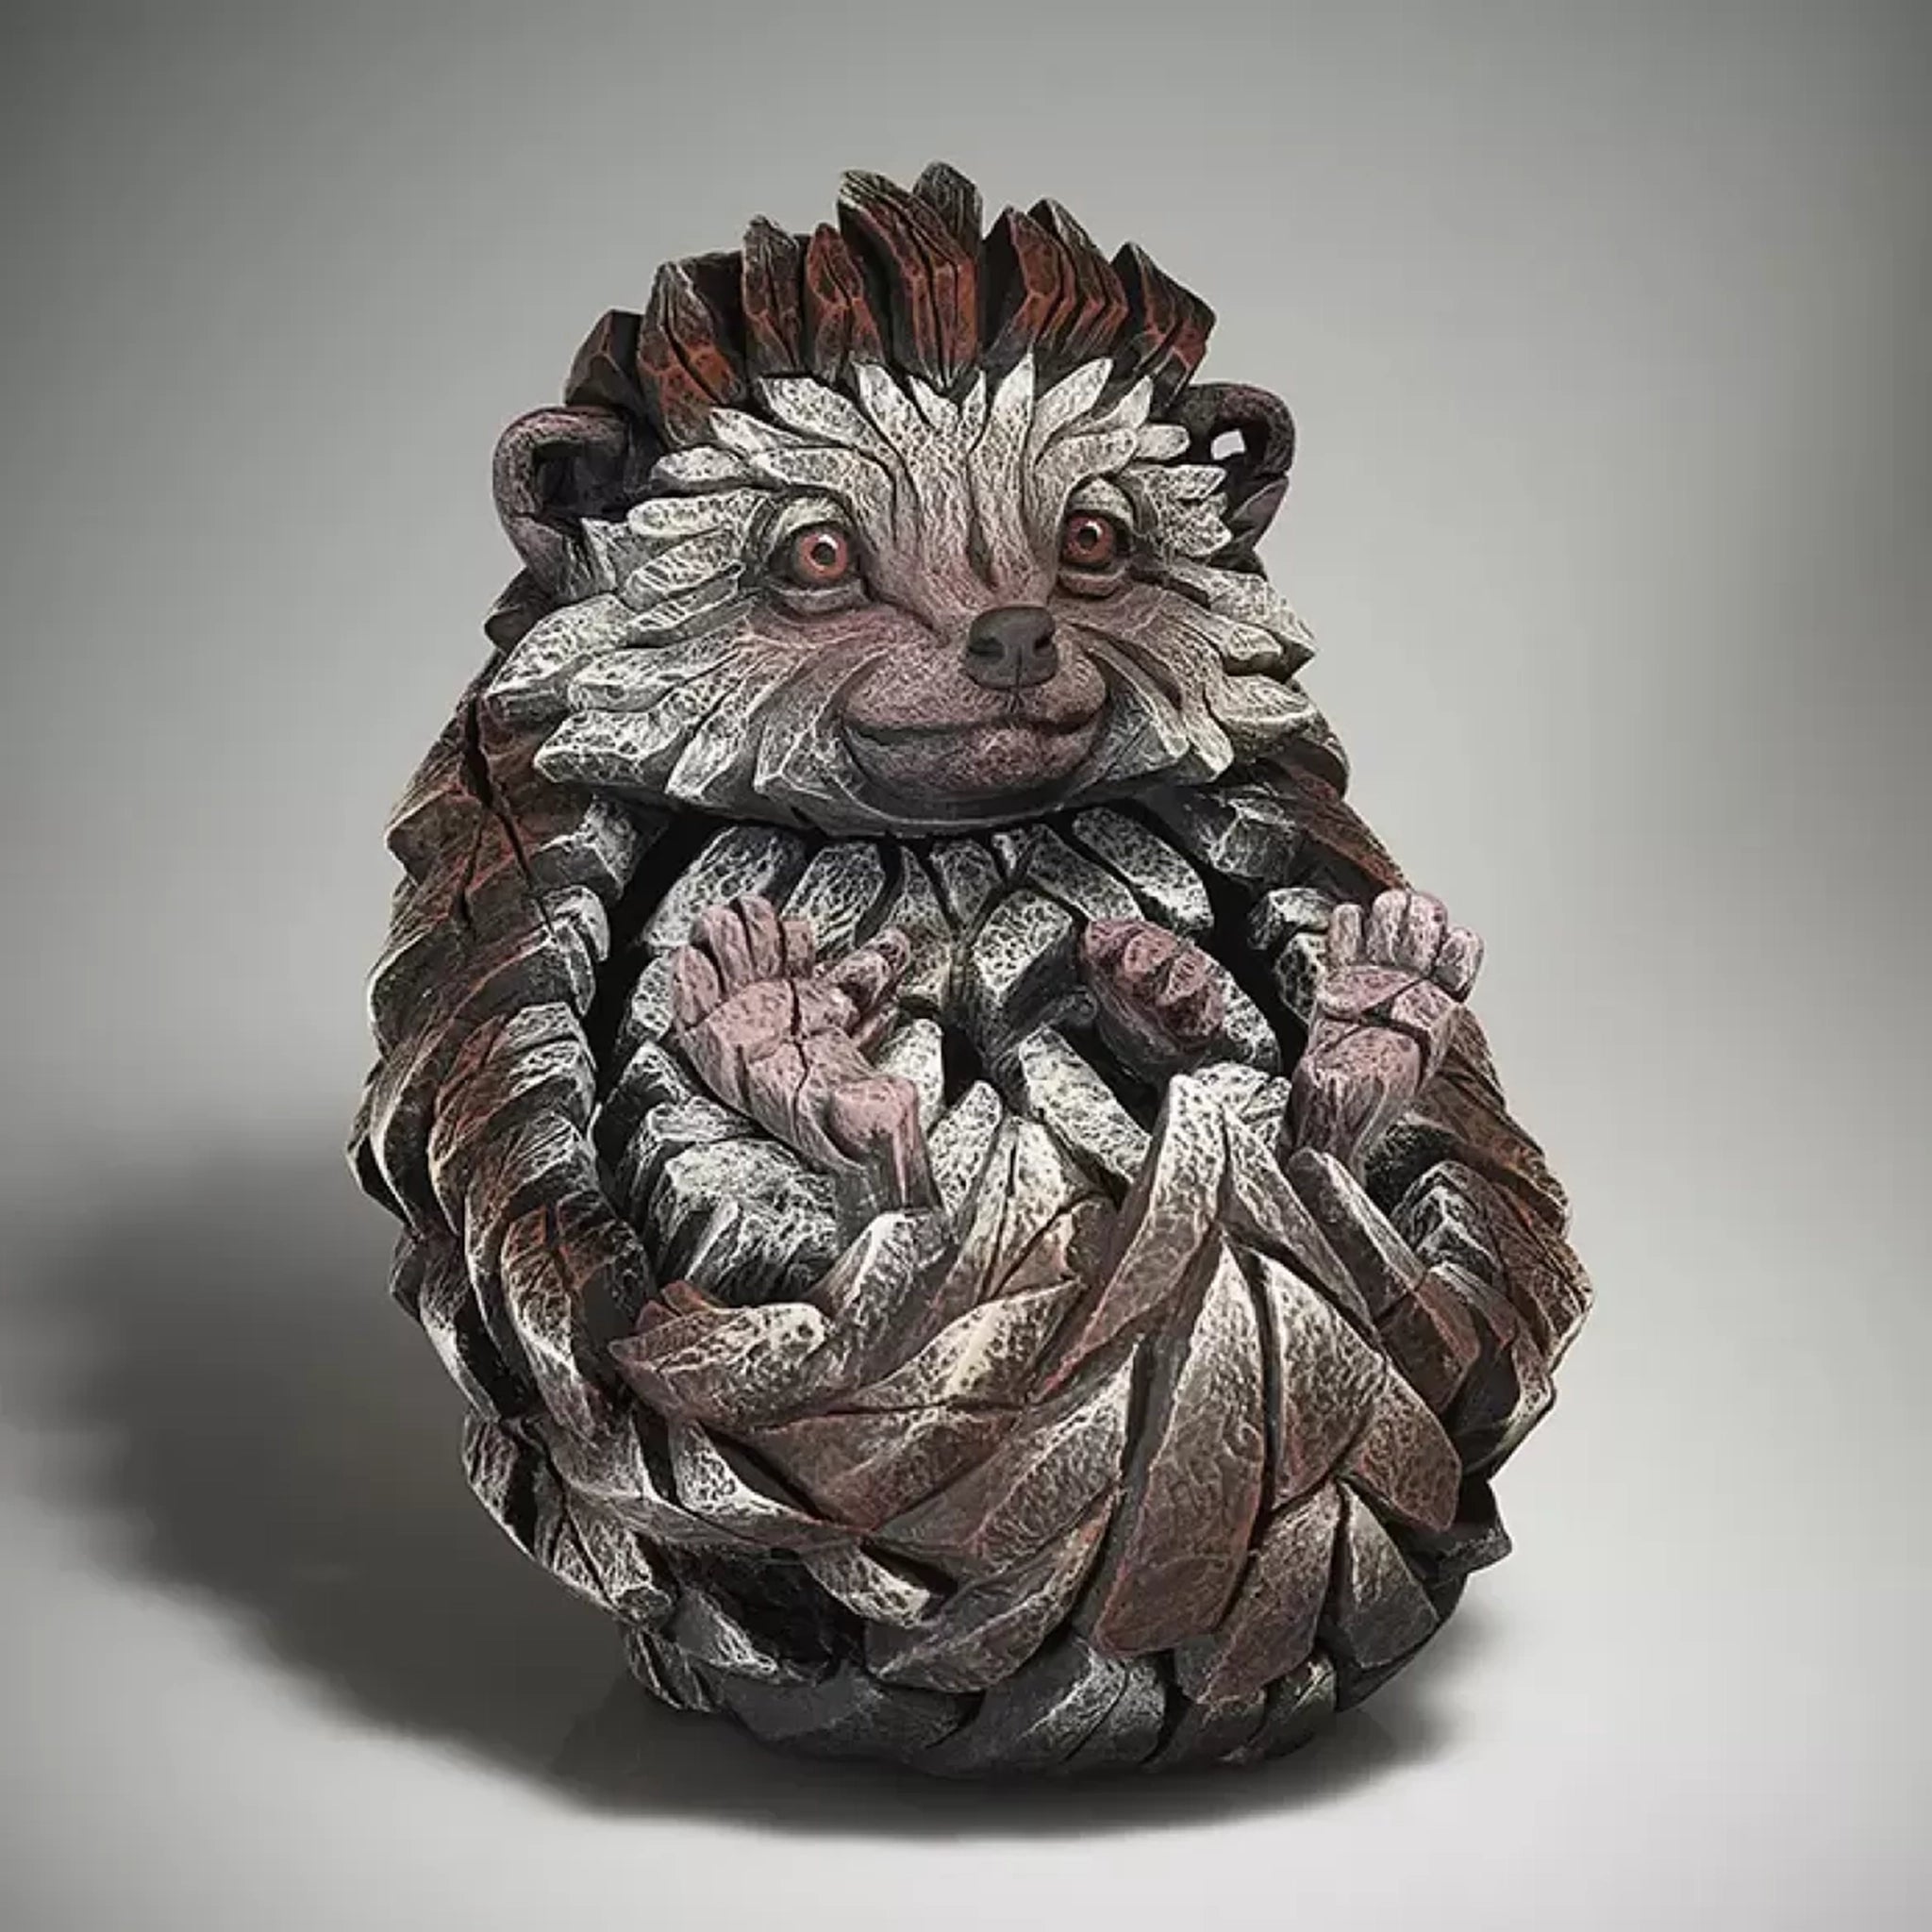 A textured and painted curled sitting hedgehog sculpture side view